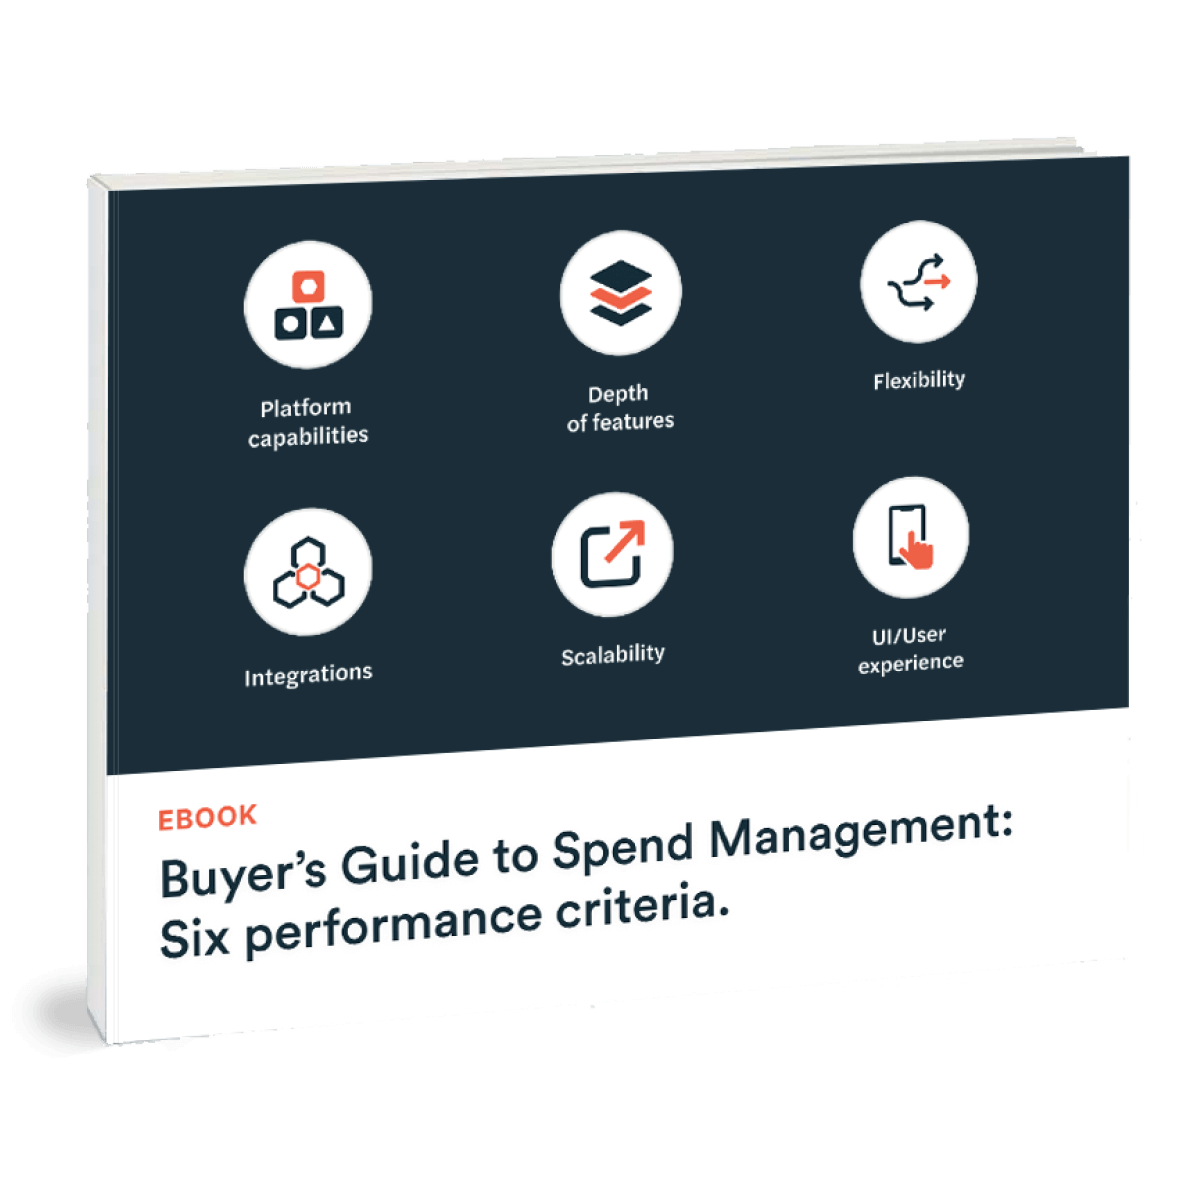 Buyer’s Guide to Spend Management: Six performance criteria.